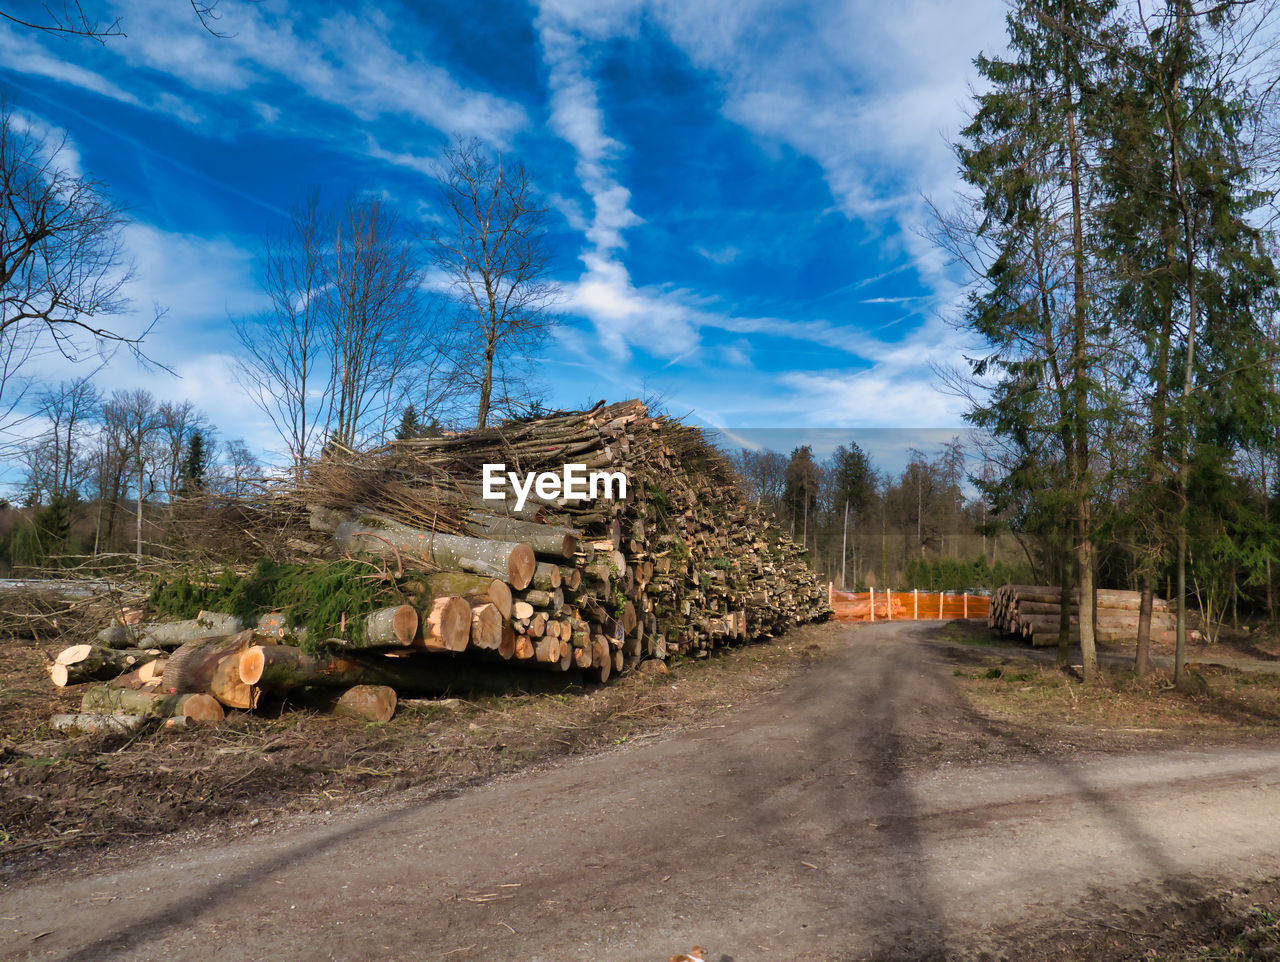 STACK OF LOGS ON ROAD AMIDST TREES AND PLANTS IN FOREST